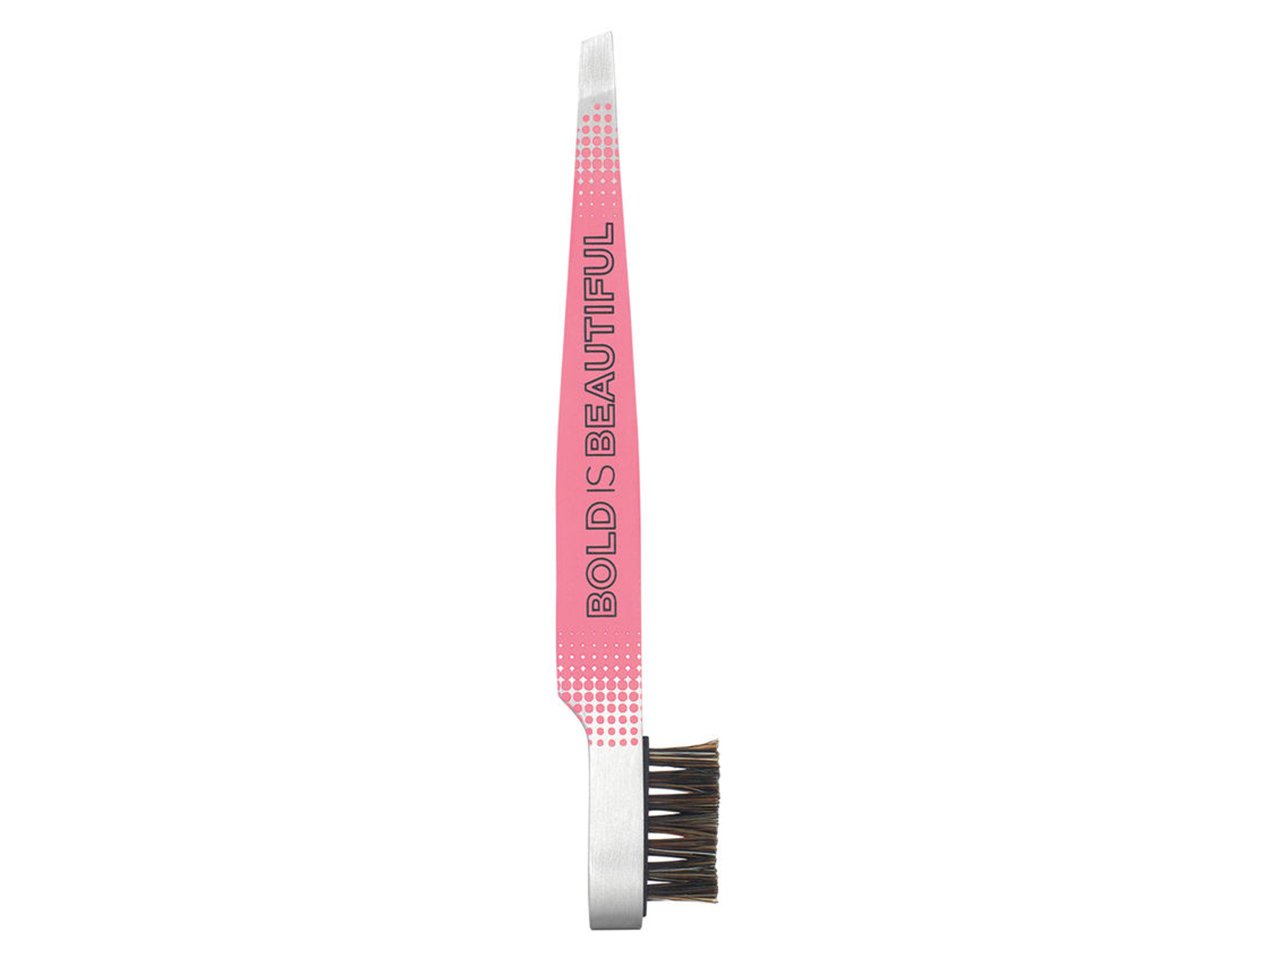 A pink and silver pair of tweezers with a brush on one end from Benefit Cosmetics.